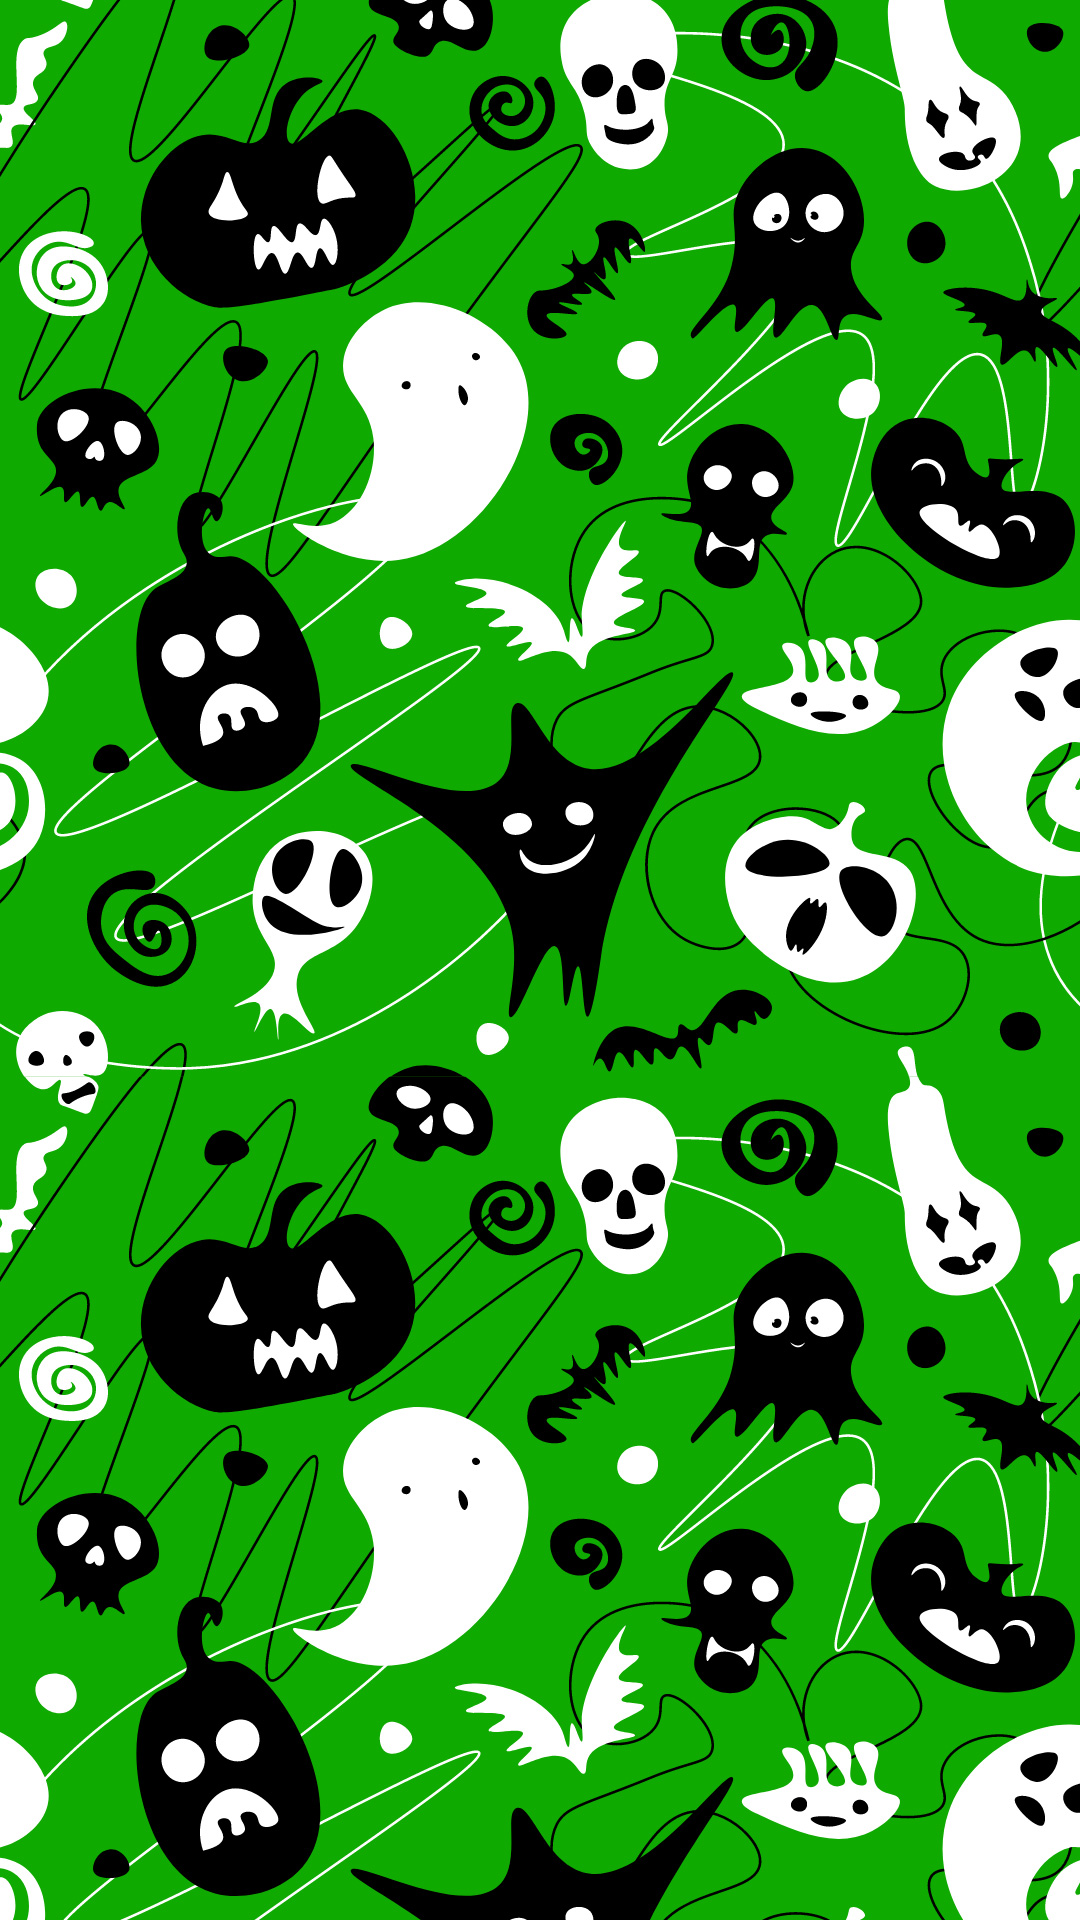 A green and black halloween pattern - Spooky